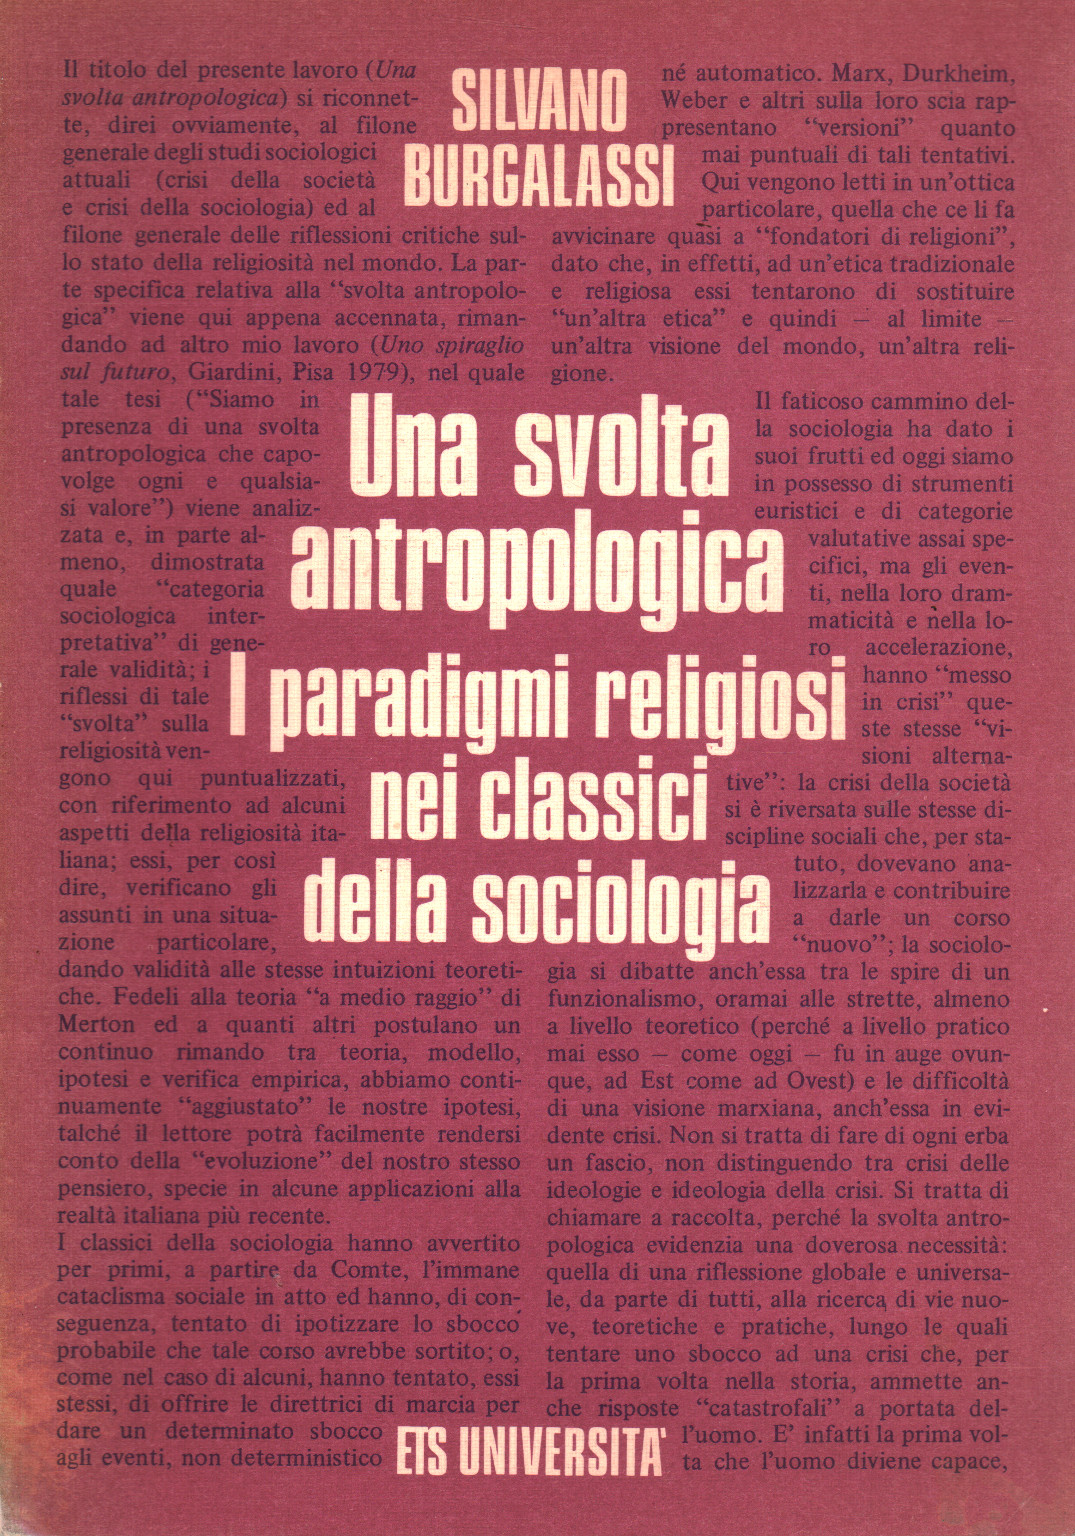 An anthropological turn. The religious paradigms ne, s.a.